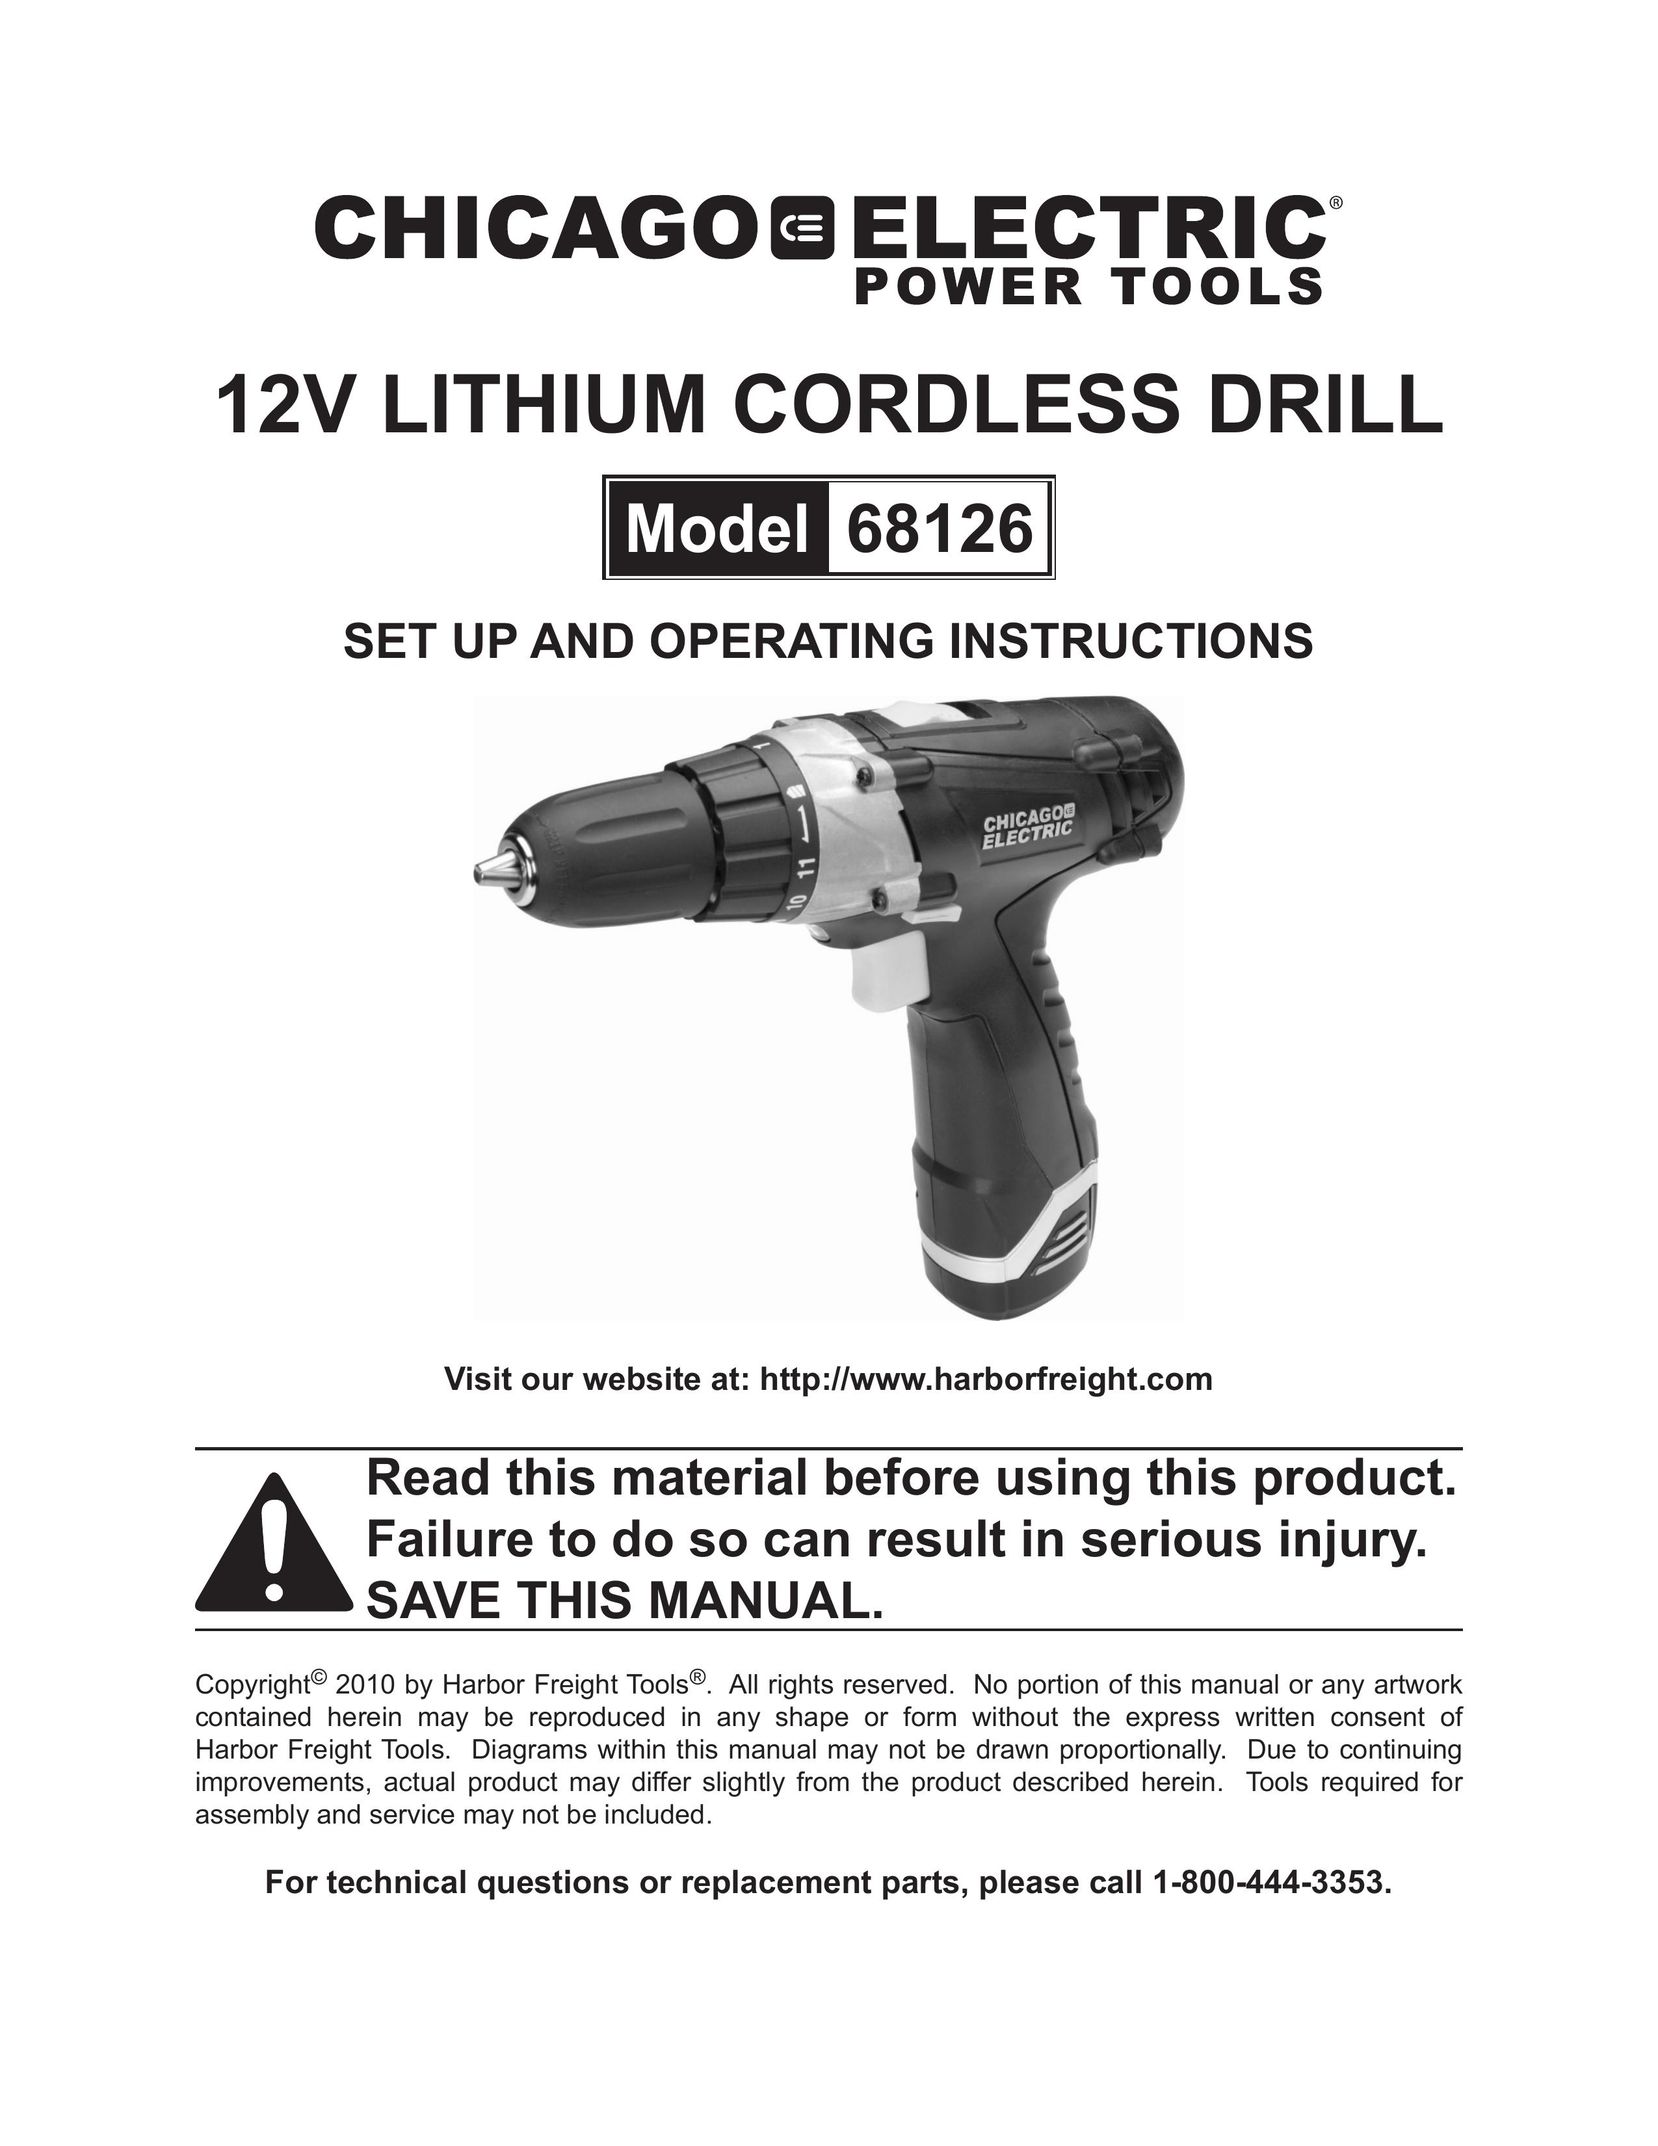 Harbor Freight Tools 68126 Cordless Drill User Manual